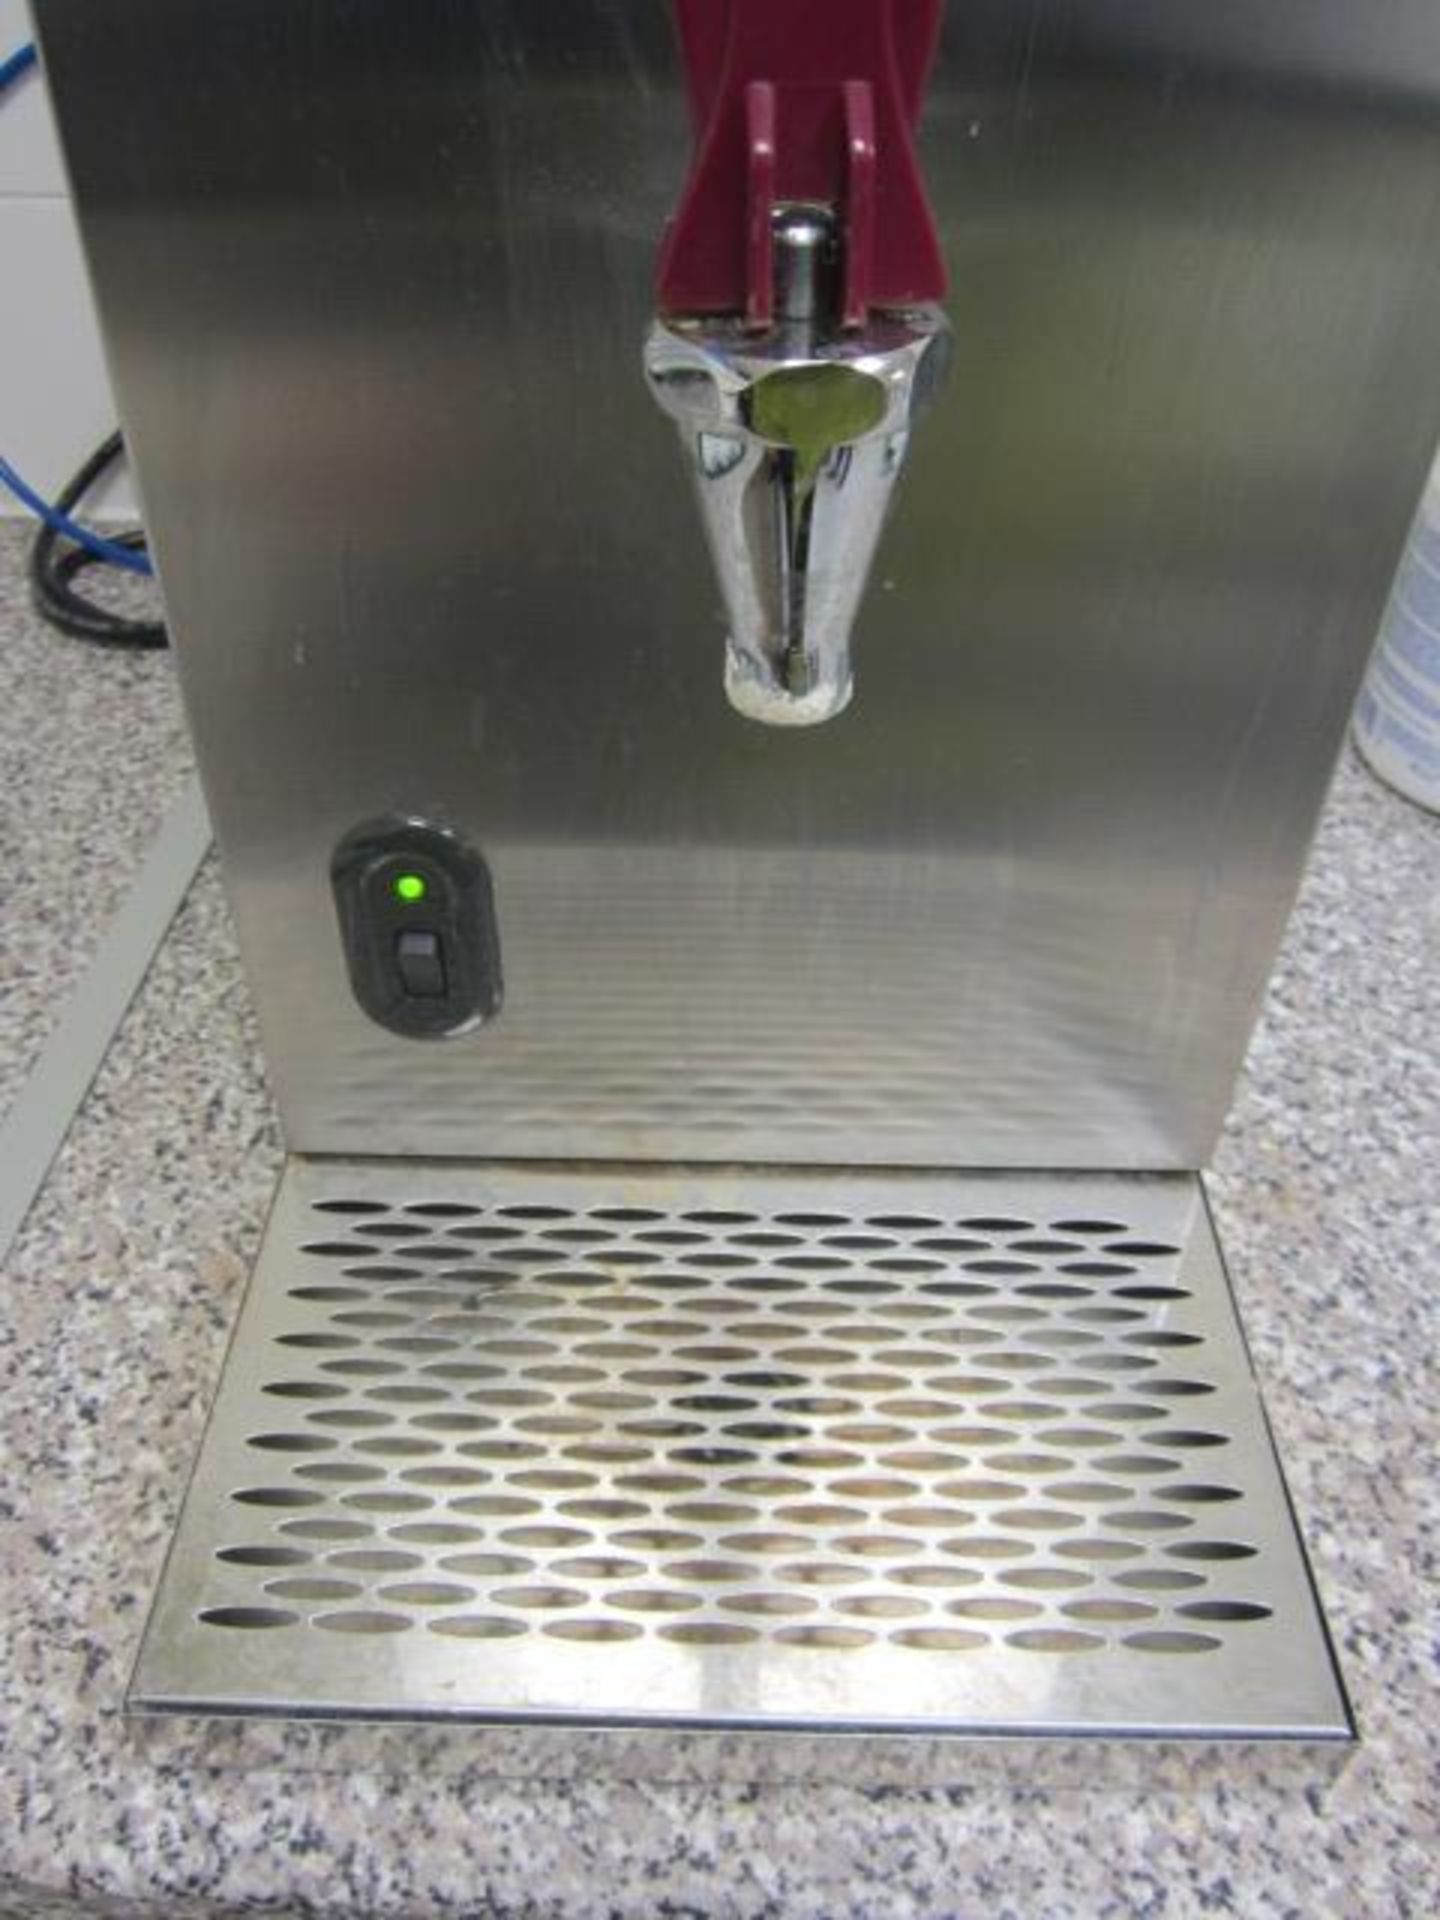 Instanta stainless steel bench top hot water boiler, model 1500, serial no. POU04476 - Disconnection - Image 2 of 4